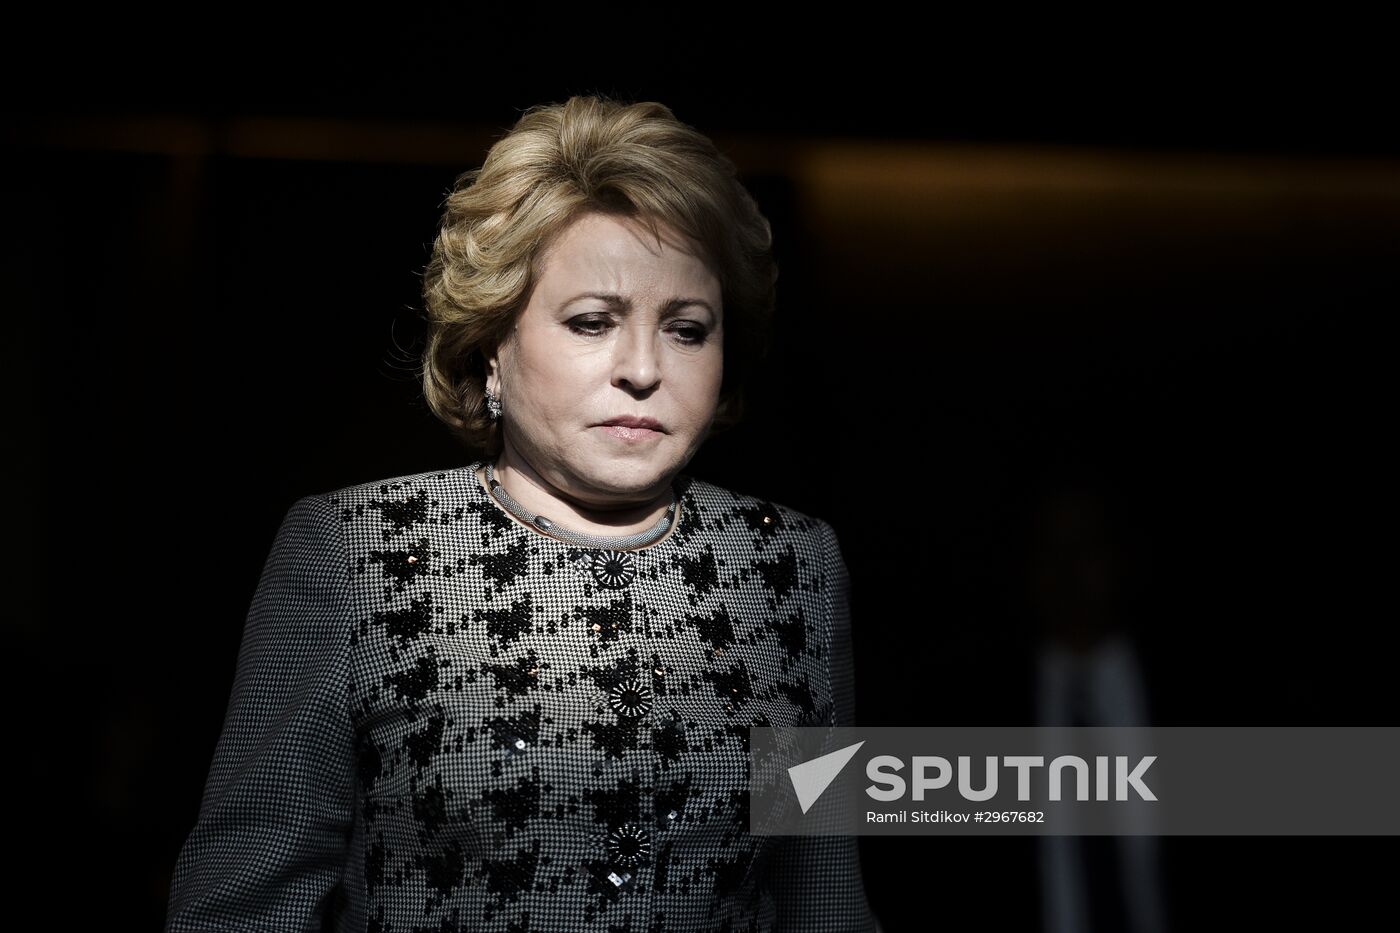 Chairperson of the Federation Council of the Russian Federation Valentina Matvienko visits Japan